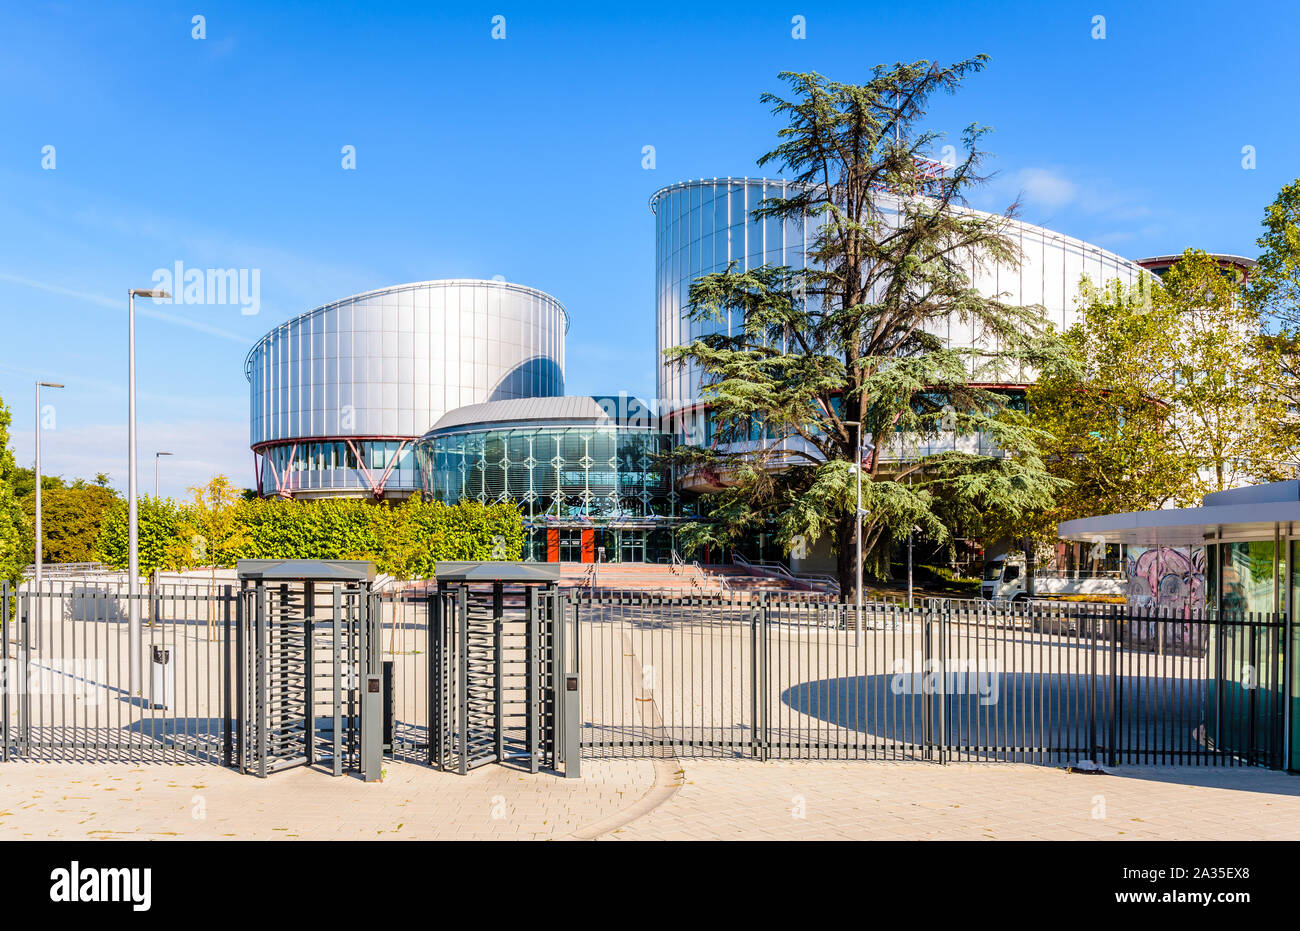 The access to the building of the European Court of Human Rights in Strasbourg, France, is secured by a fence and security turnstiles. Stock Photo